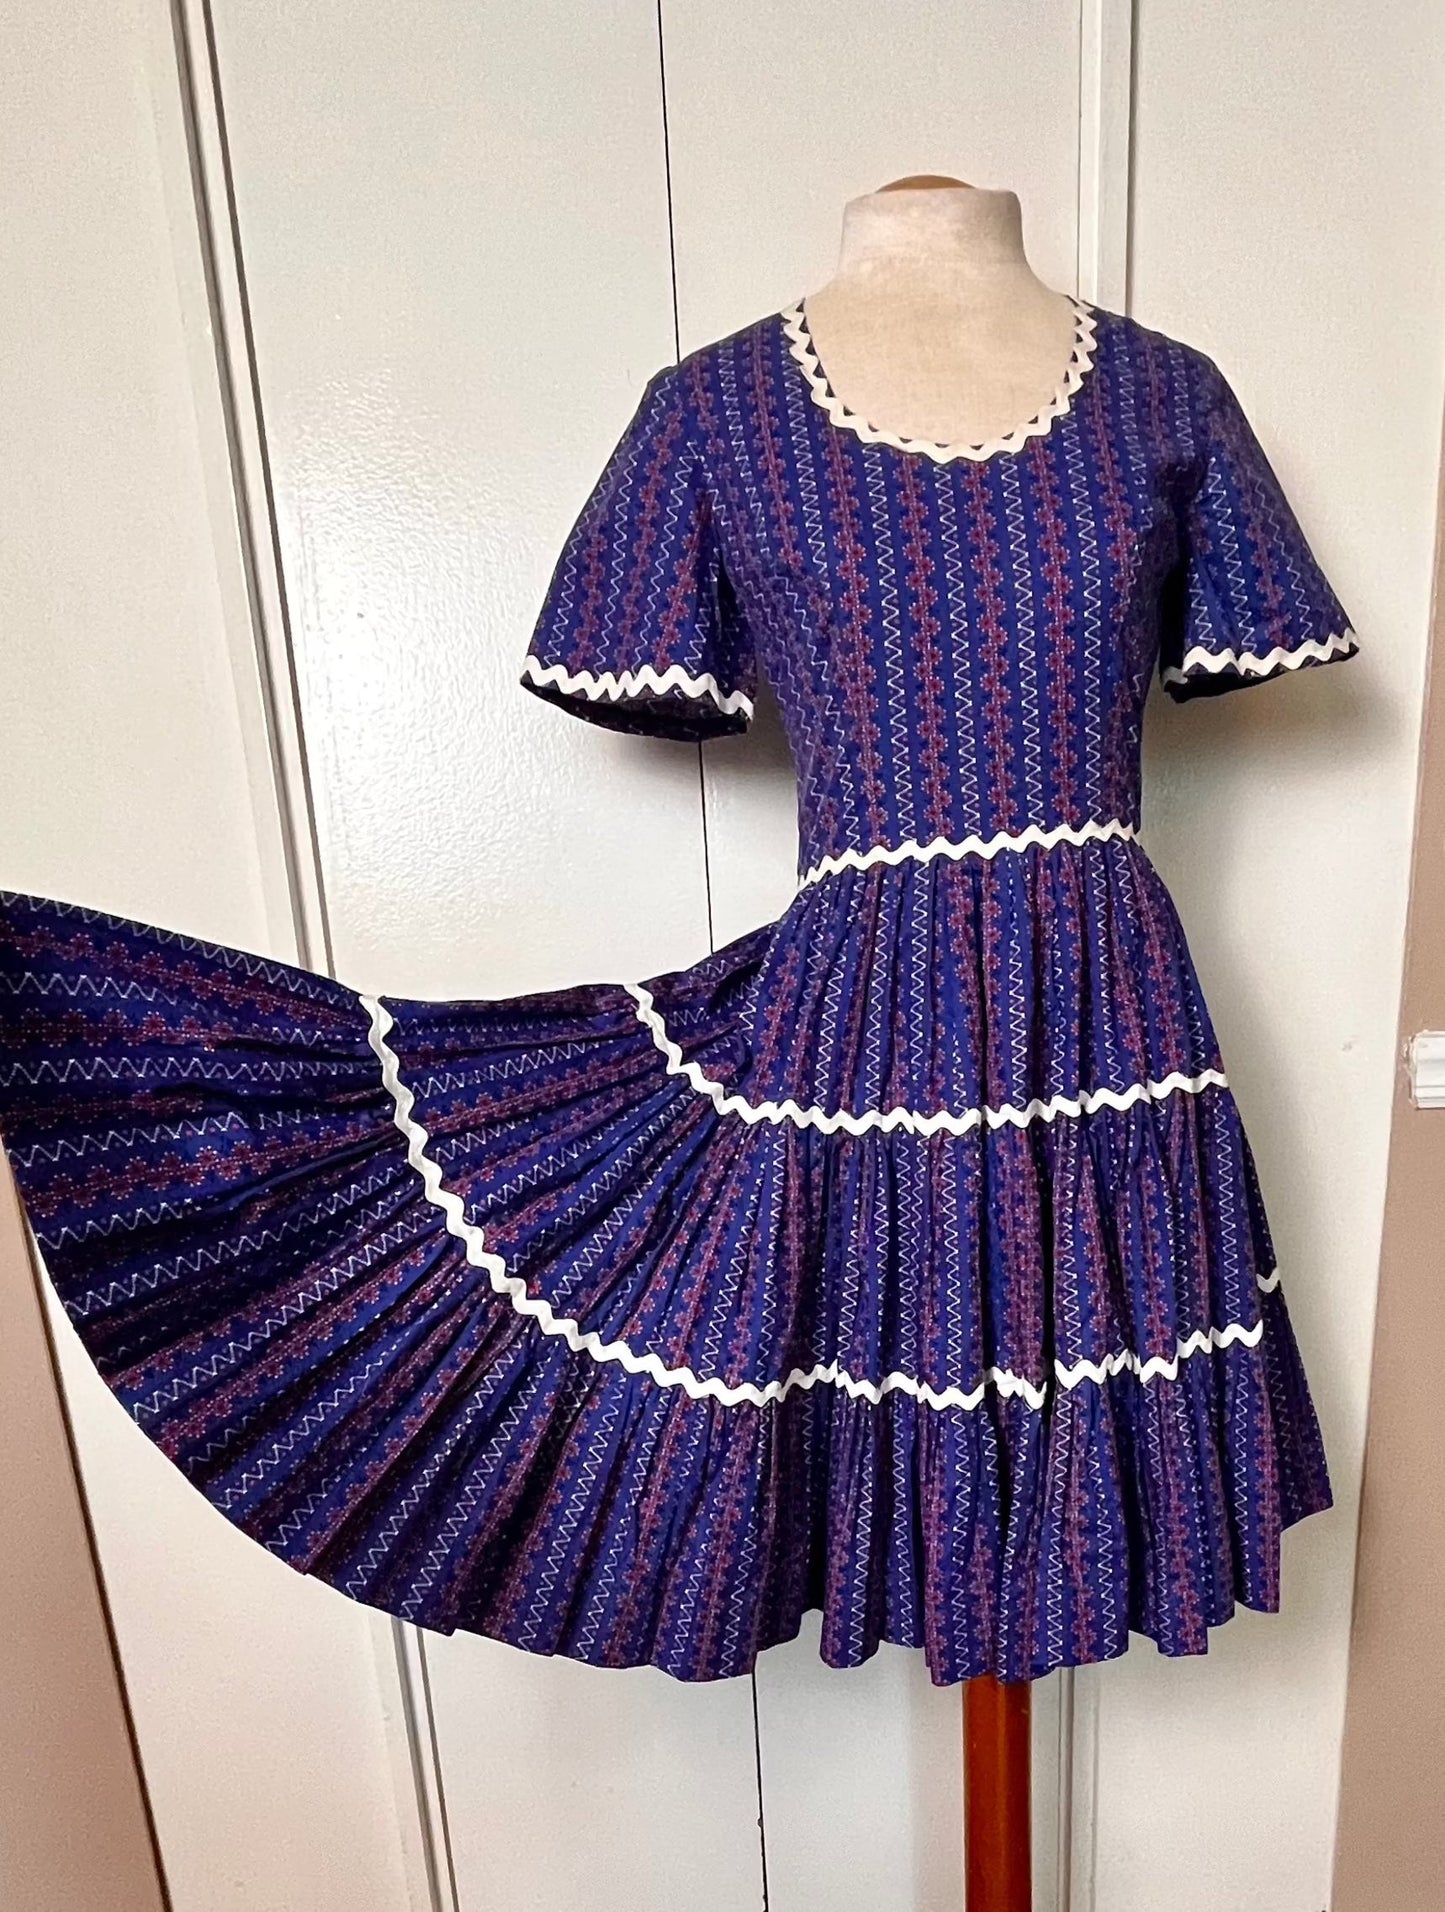 Vintage 1980's "Home-sewn" Square Dancing Dress in Blue & Red Calico